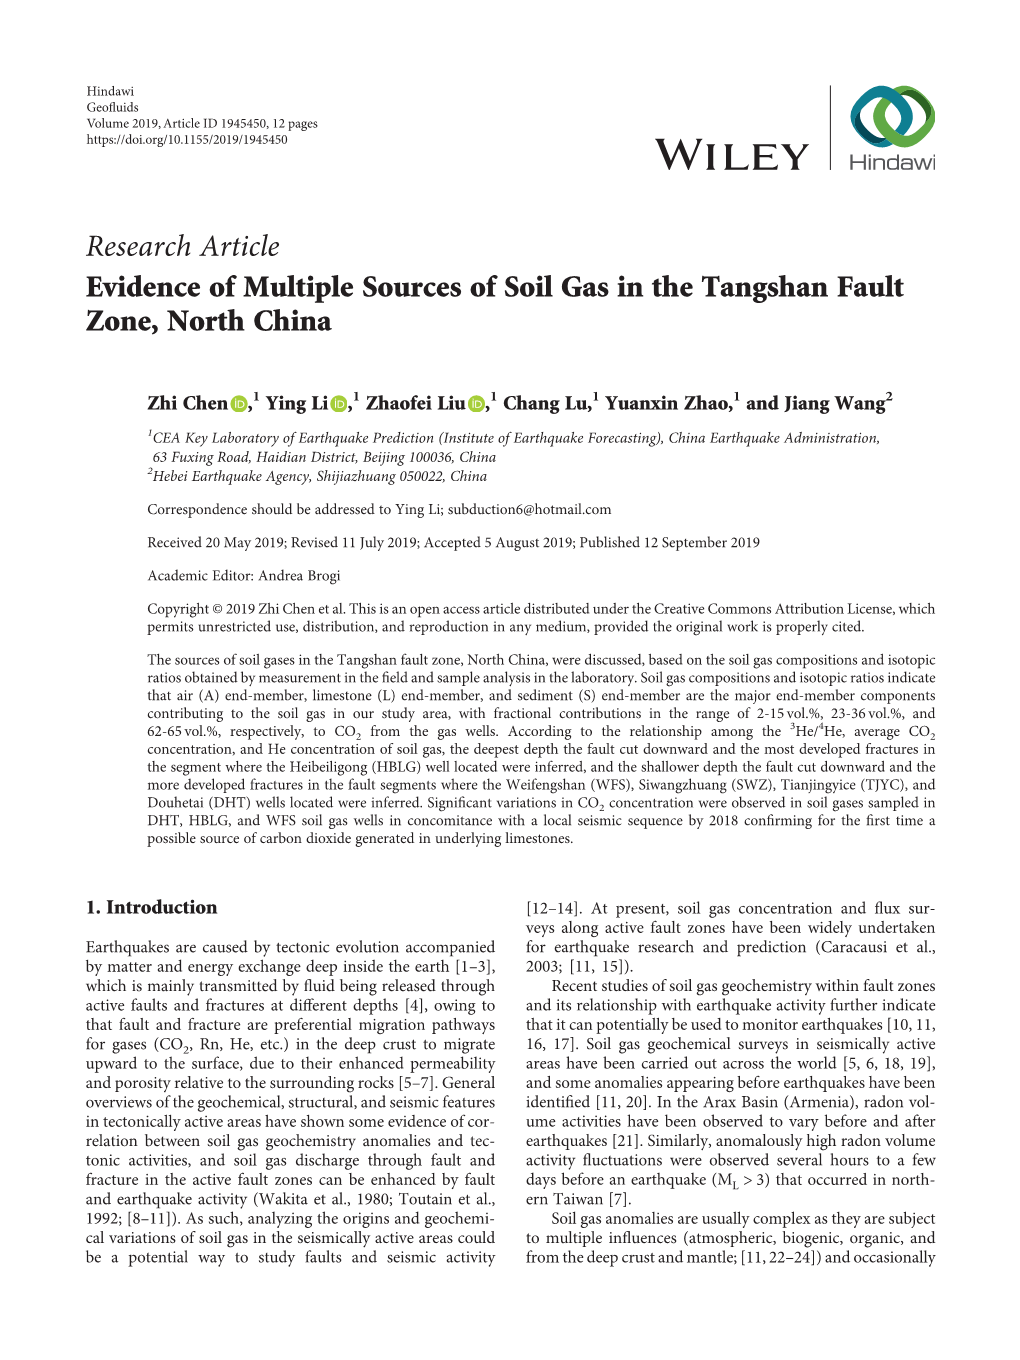 Research Article Evidence of Multiple Sources of Soil Gas in the Tangshan Fault Zone, North China